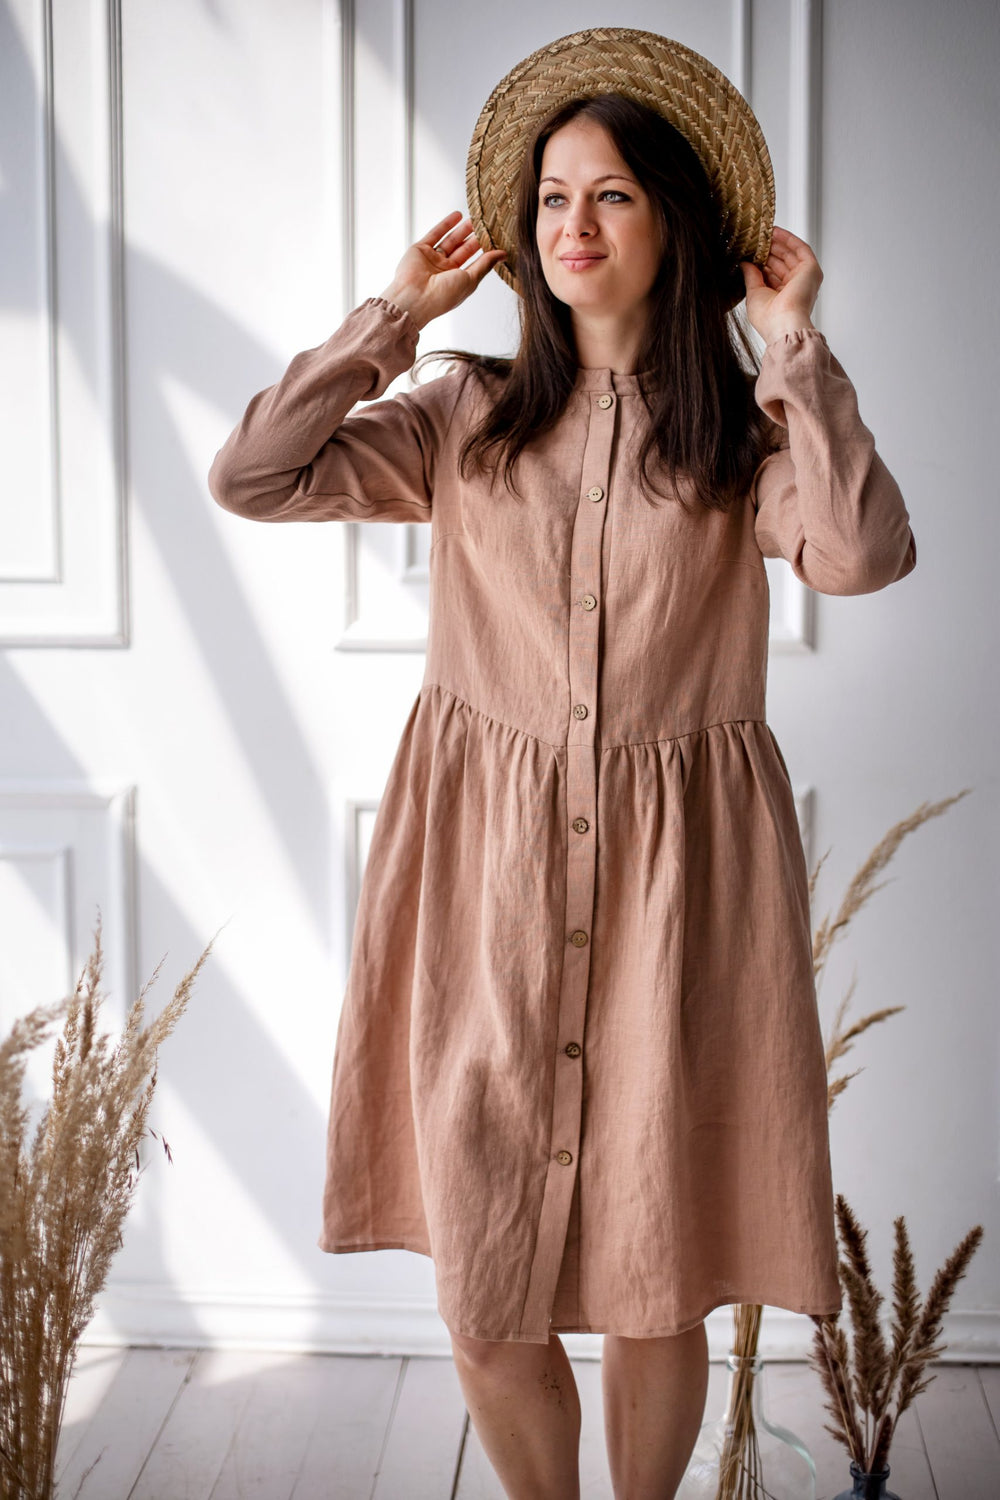 Woman wearing the Alice Dress sewing pattern from Kates Sewing Patterns on The Fold Line. A shirt dress pattern made in wool, linen or cotton fabrics, featuring a band collar, bust darts, button placket, gathered skirt, full length sleeves with elasticate